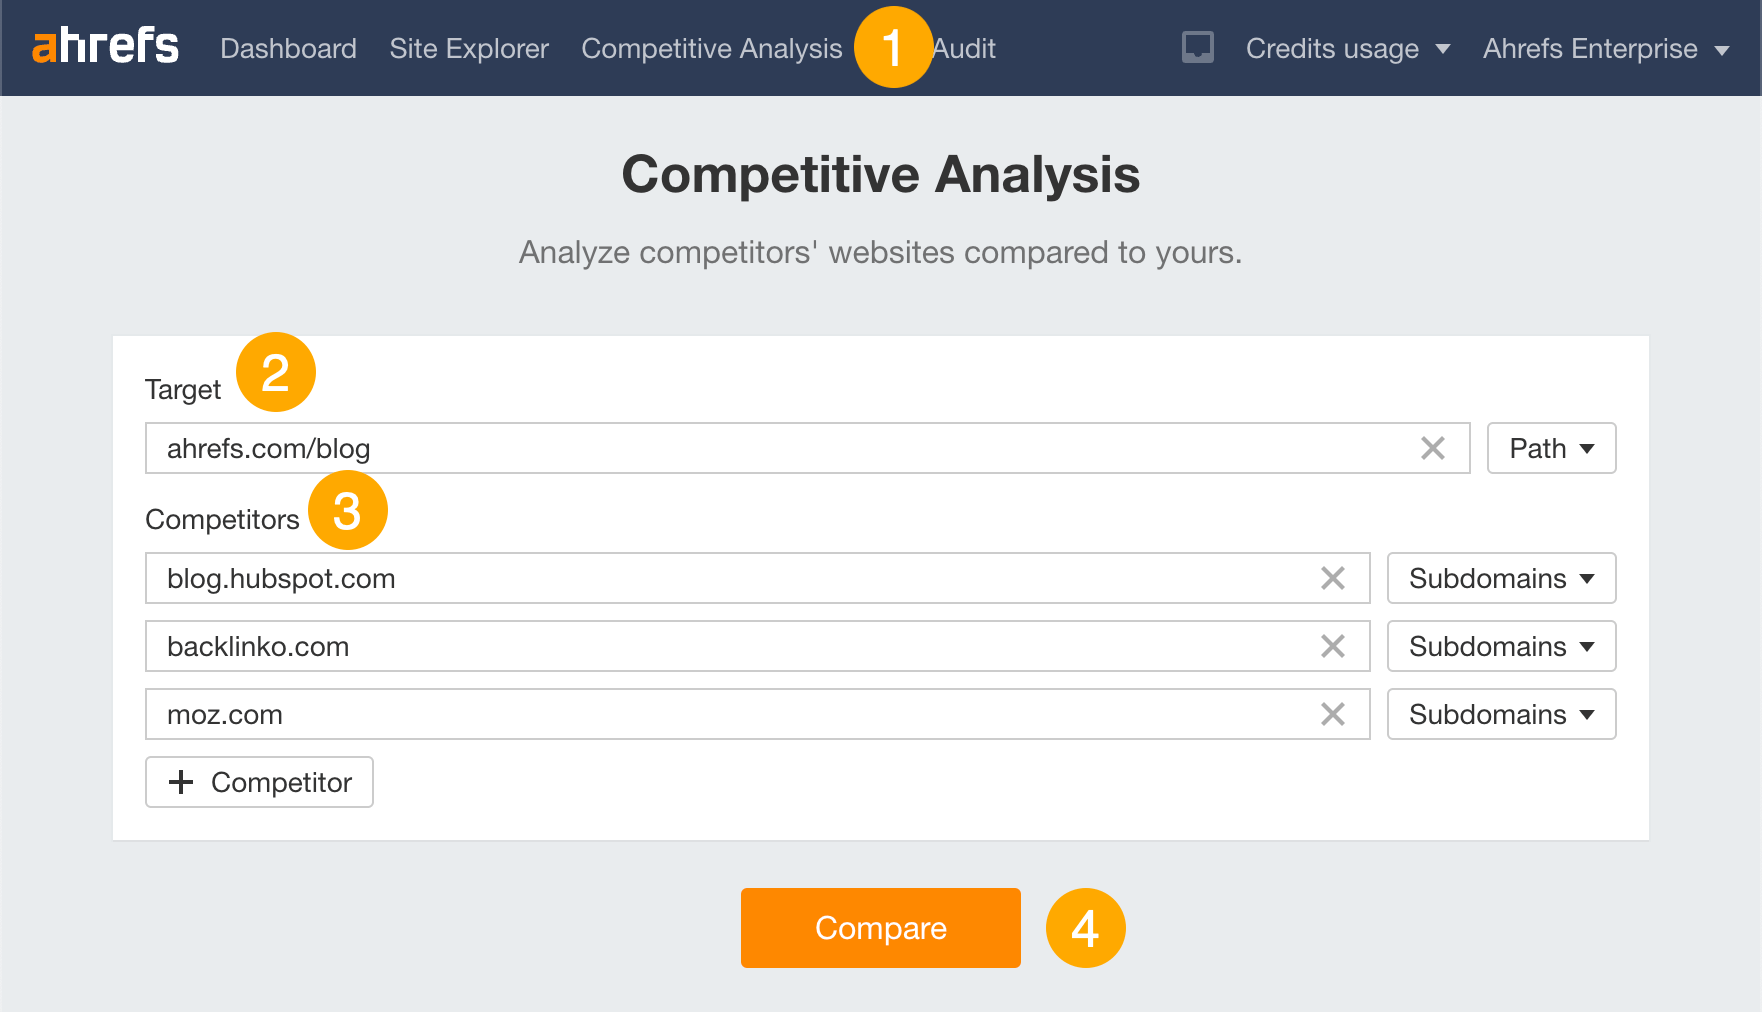 Doing a competitive analysis in Ahrefs' Competitive Analysis tool